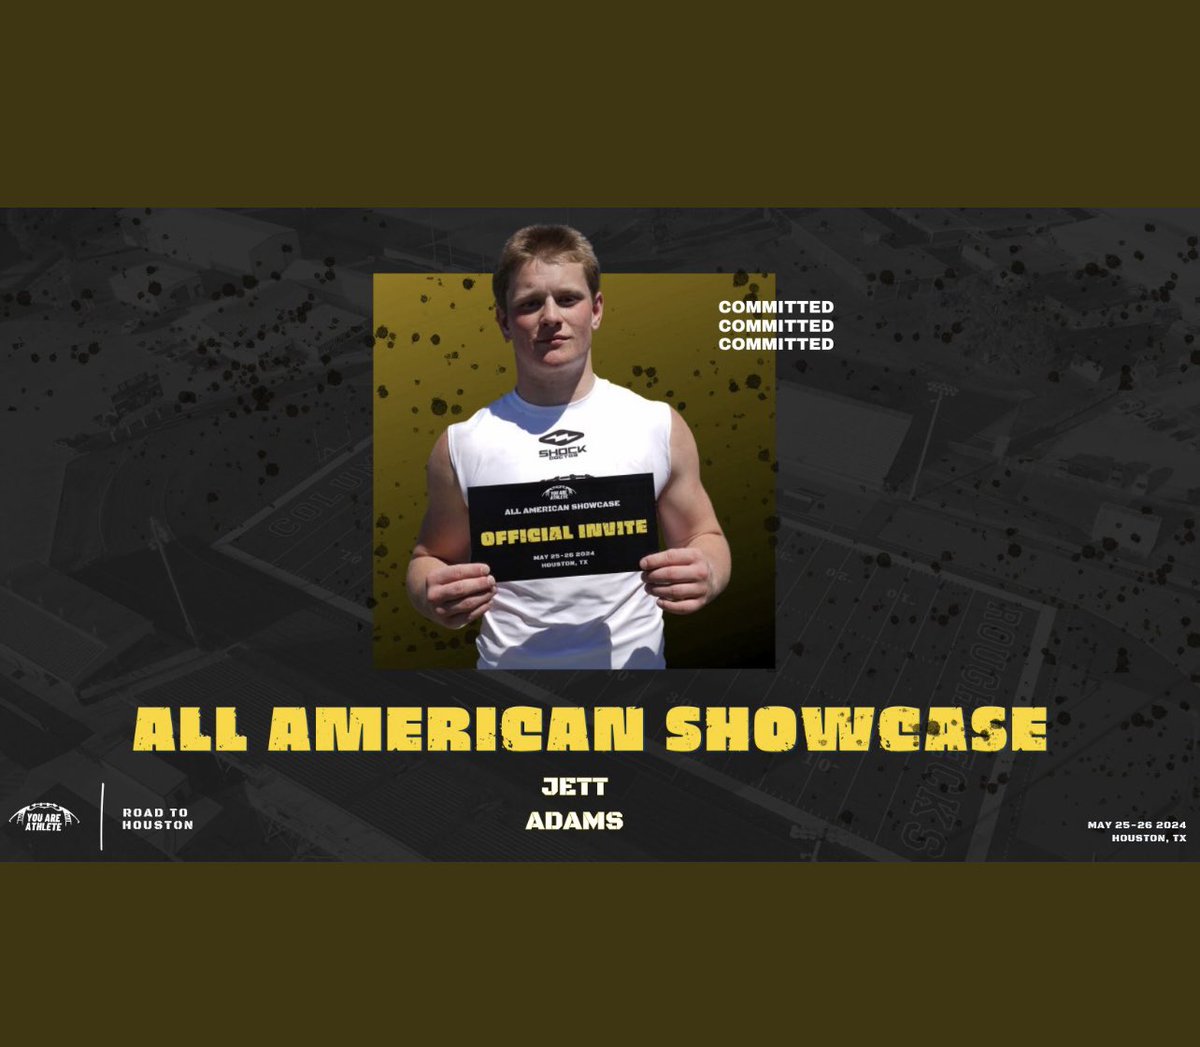 Can’t wait to compete at the All American Showcase @youareathlete